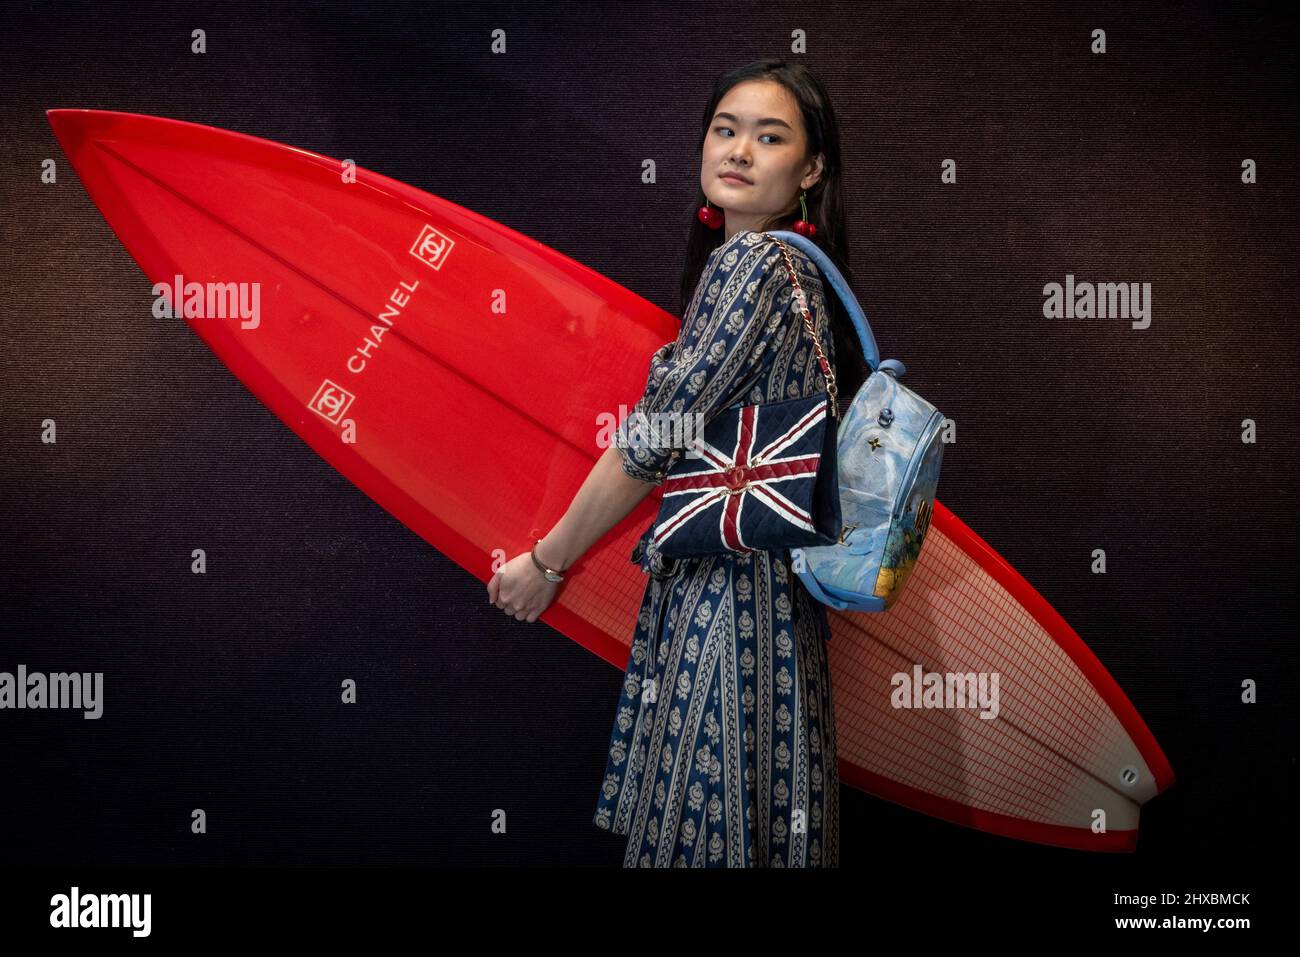 London, UK. 11 March 2022. A staff member presents a red carbon fibre Chanel  Surfboard with three keels (Est. £2,000 – 3,000) and a Chanel Union Jack  shoulder bag (Est. £2,000 –